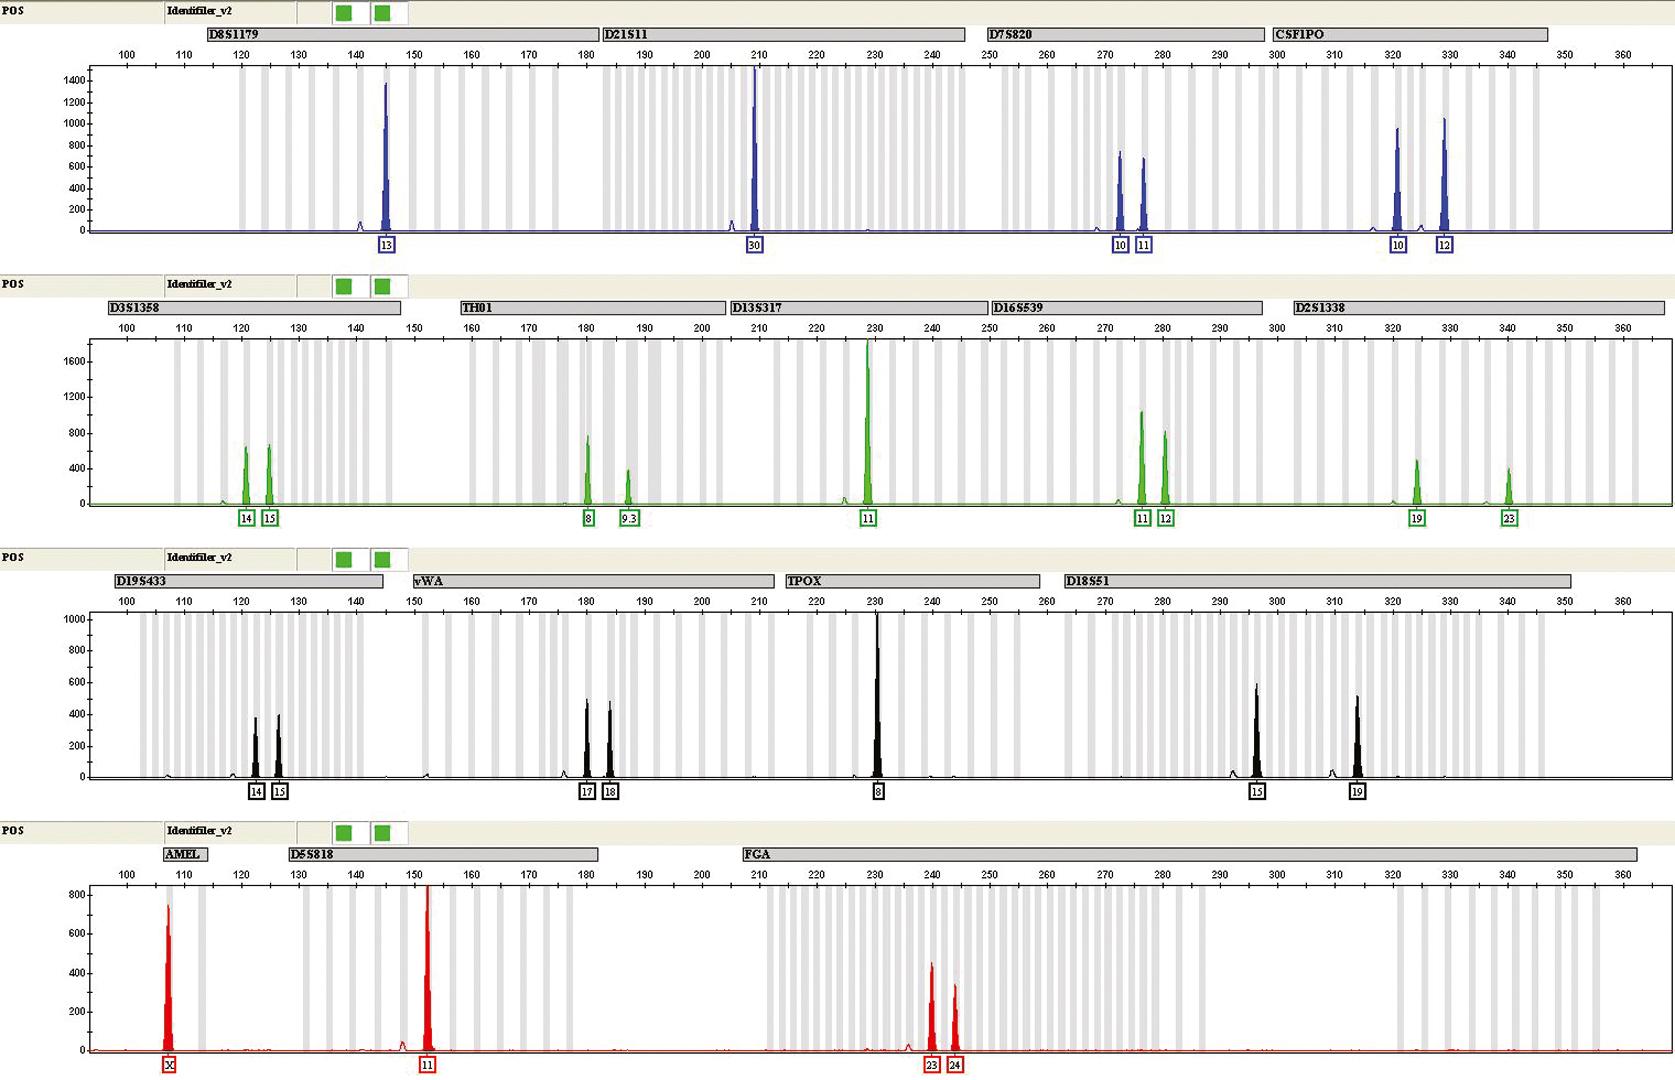 Fig. 74.1, The results of the kit-included positive control 9947A amplified with the AmpFLSTR Identifiler PCR Amplification Kit and electrophoresed on the ABI P rism 3130 xl Genetic Analyzer (Applied Biosystems) and typed with GeneMapper ID Software v.3.1.2 (Applied Biosystems). The results for the 15 autosomal STR loci and amelogenin, a sexing marker, are visualized. This image displays the phenotype of the positive control amplified in this multiplex. The locus name is shown in the gray bar above the peaks; the allele call(s) for each locus is just below the highlighted peak. The reader may wish to enlarge this figure so that gene identification is clear. The amelogenin peak is labeled “AMEL” on far left of bottom-most scan (first peak on left). (Applied Biosystems, Foster City, CA.)